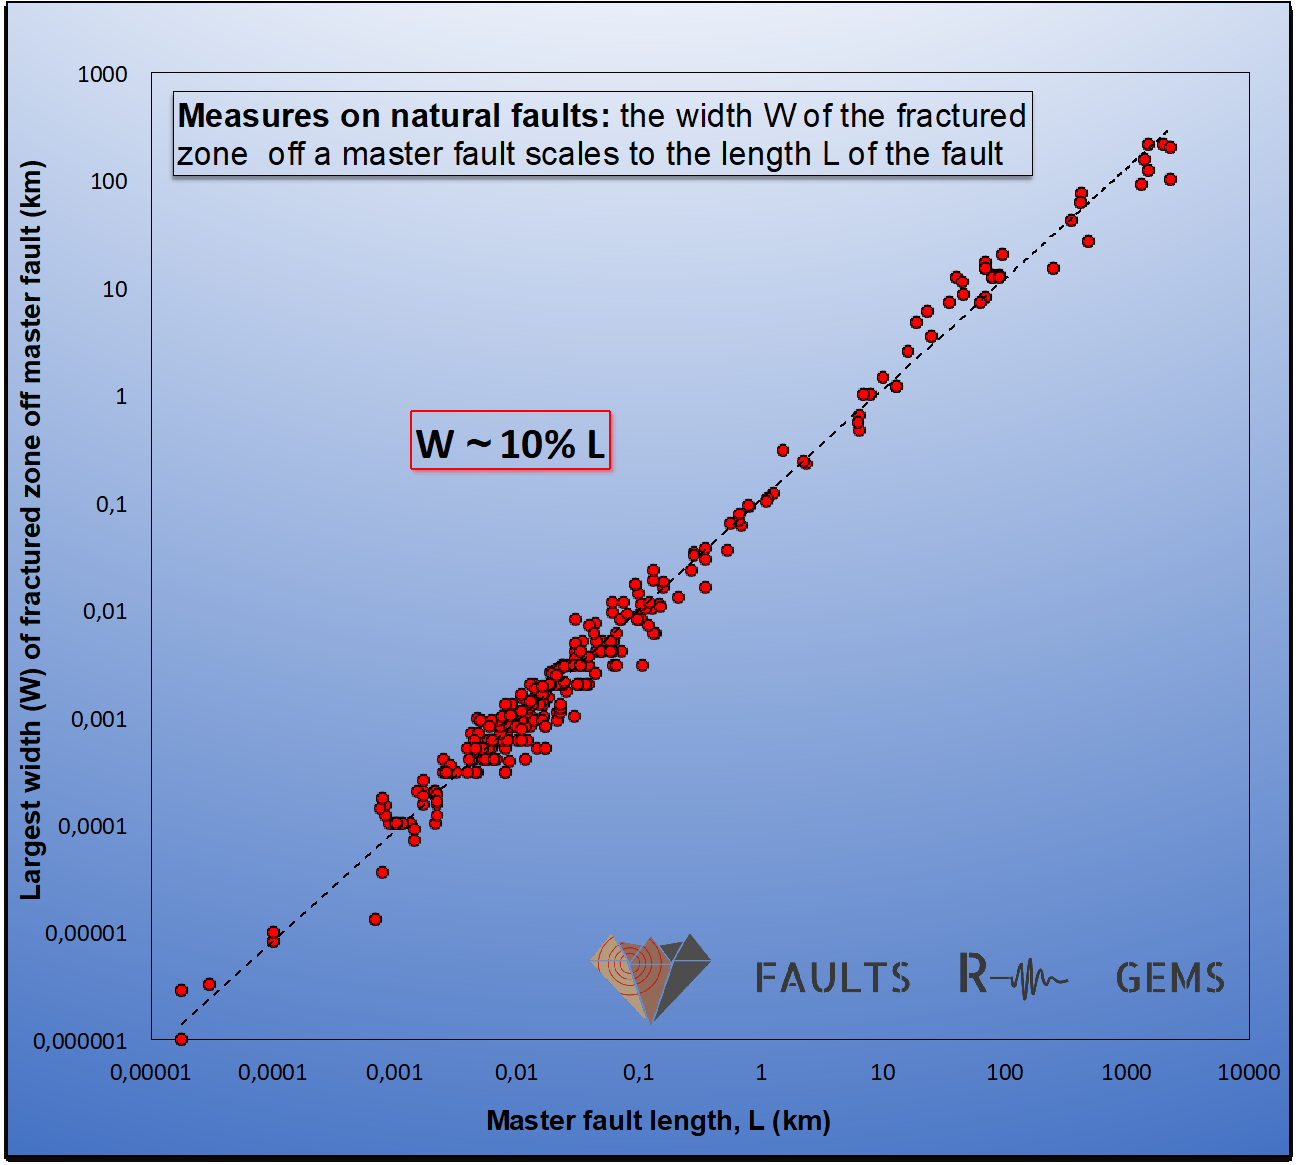 Scaling relation between fault length and across-fault width of fractured zone off the fault (data are measures on natural faults, T. Giampietro PhD thesis, 2019)